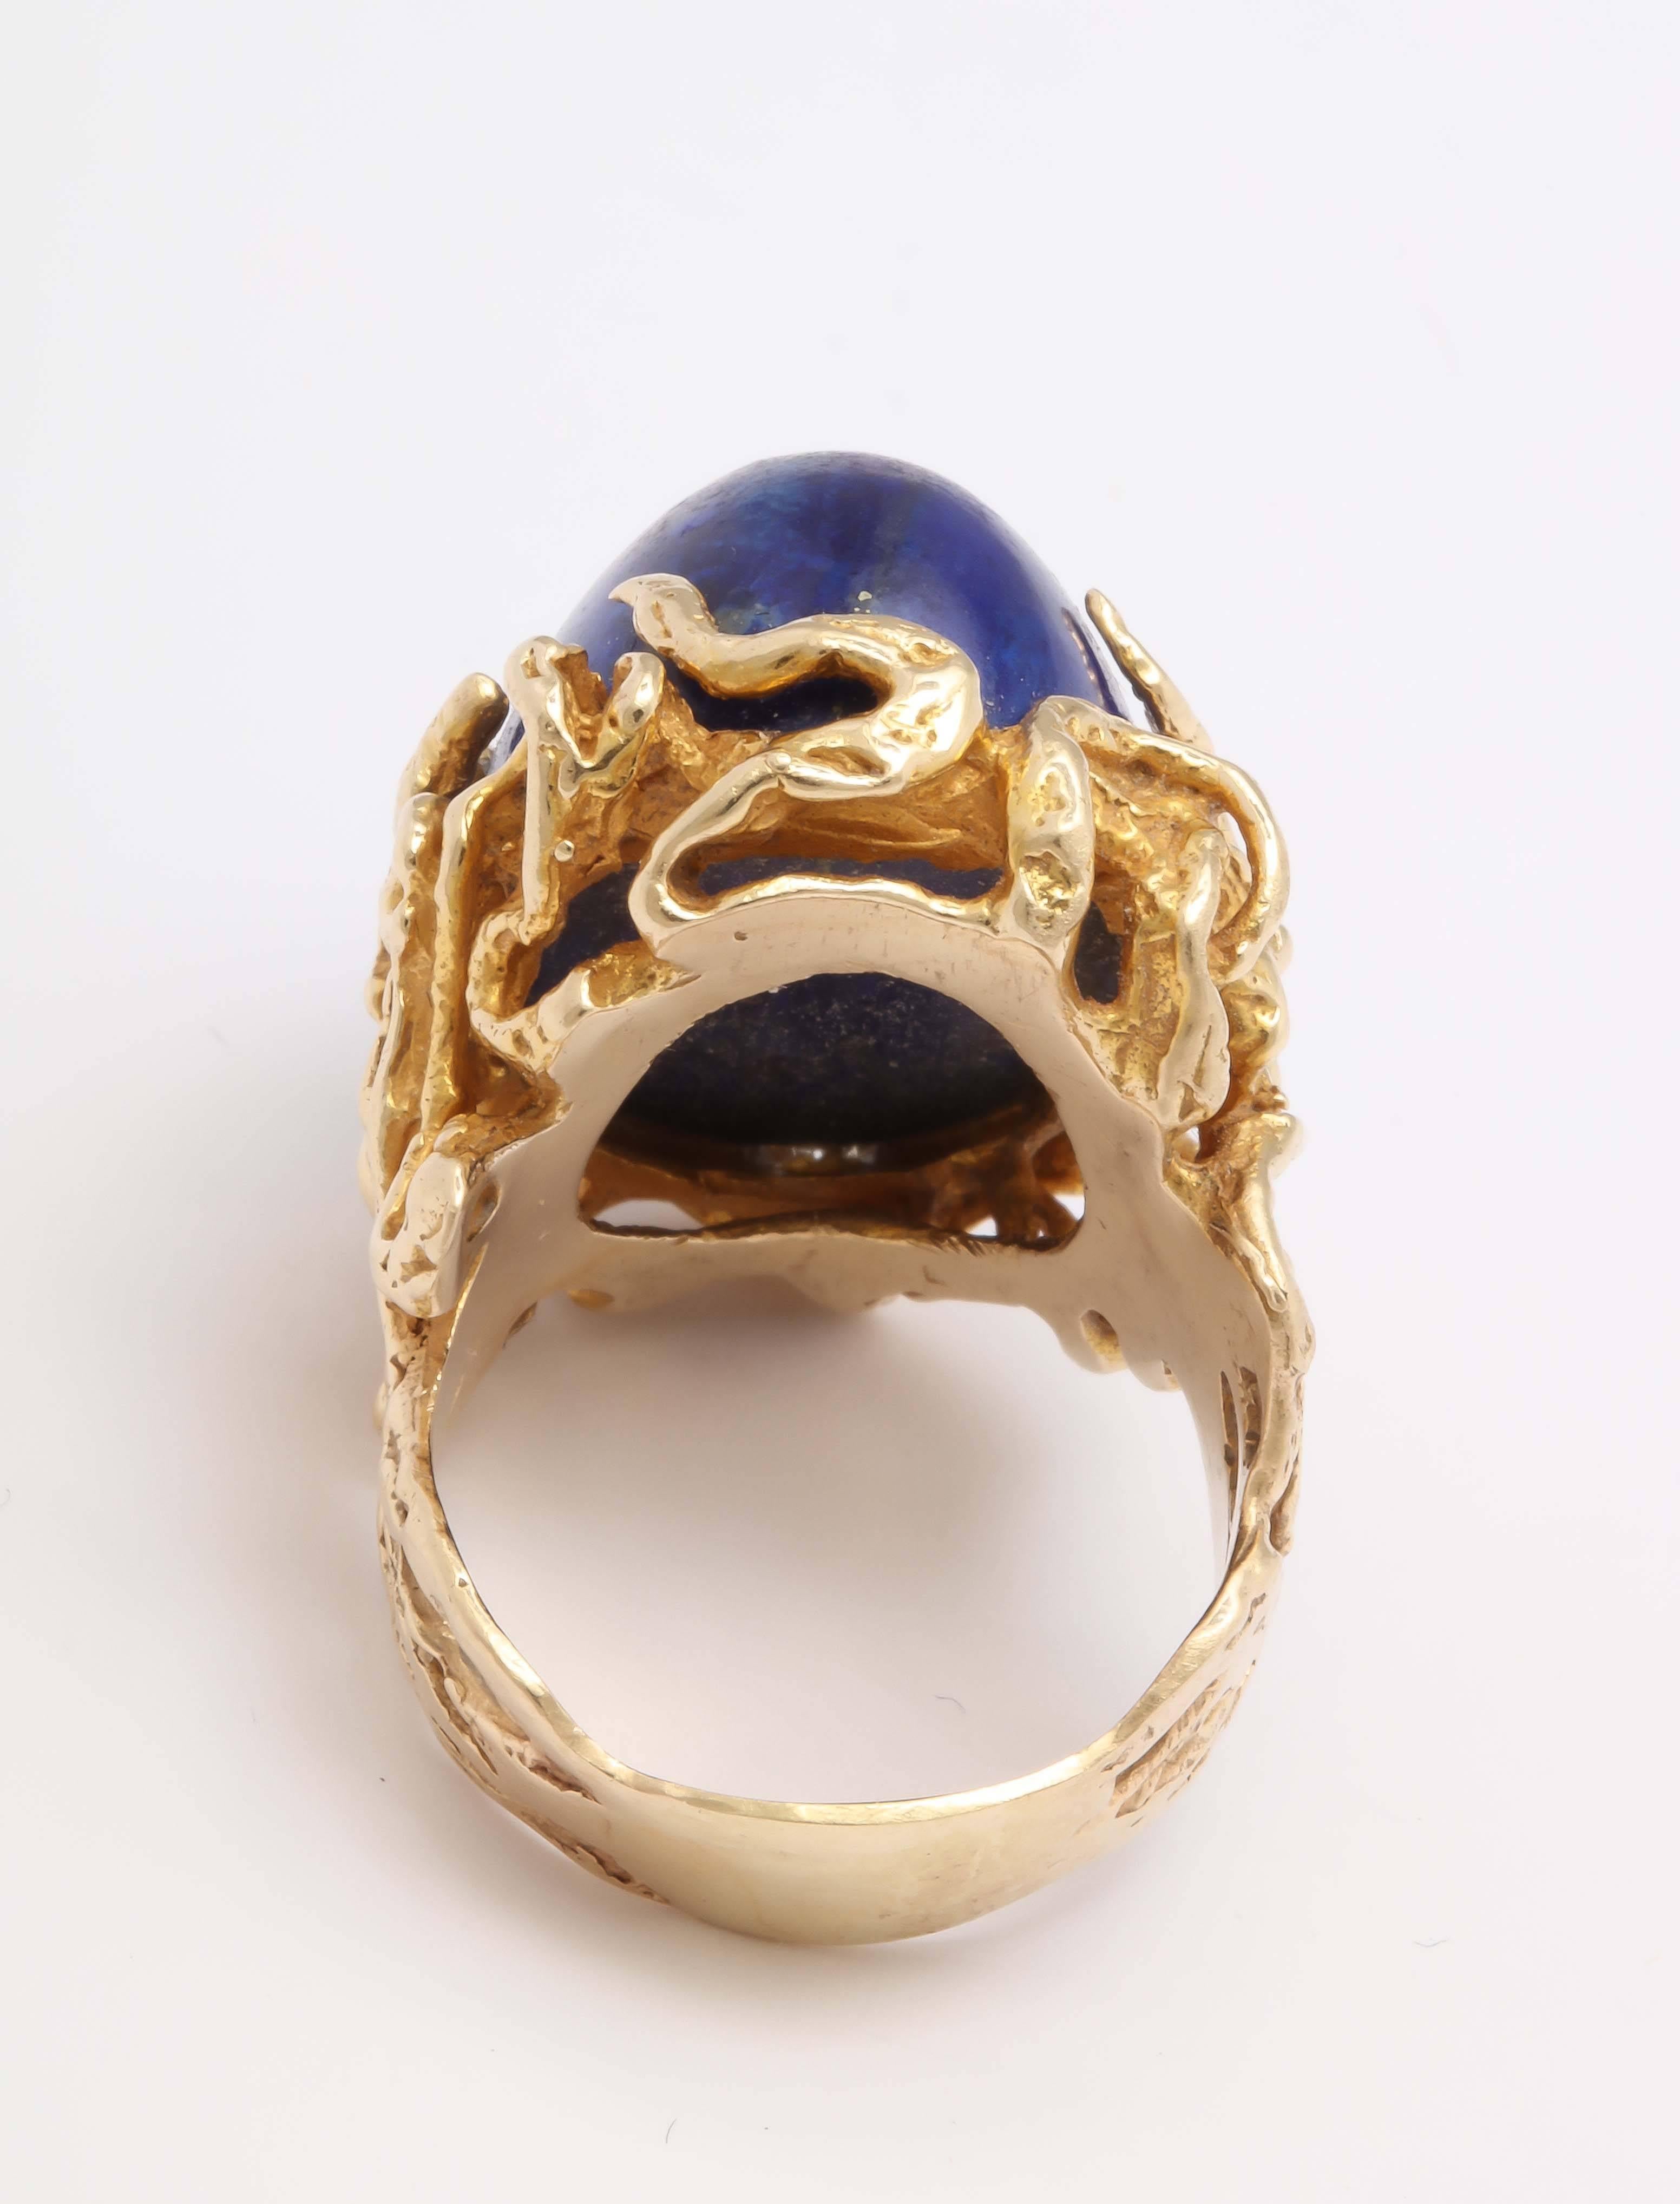 Oversize Oval Lapis Yellow Gold Ring in Naturalistic Branch Setting 4